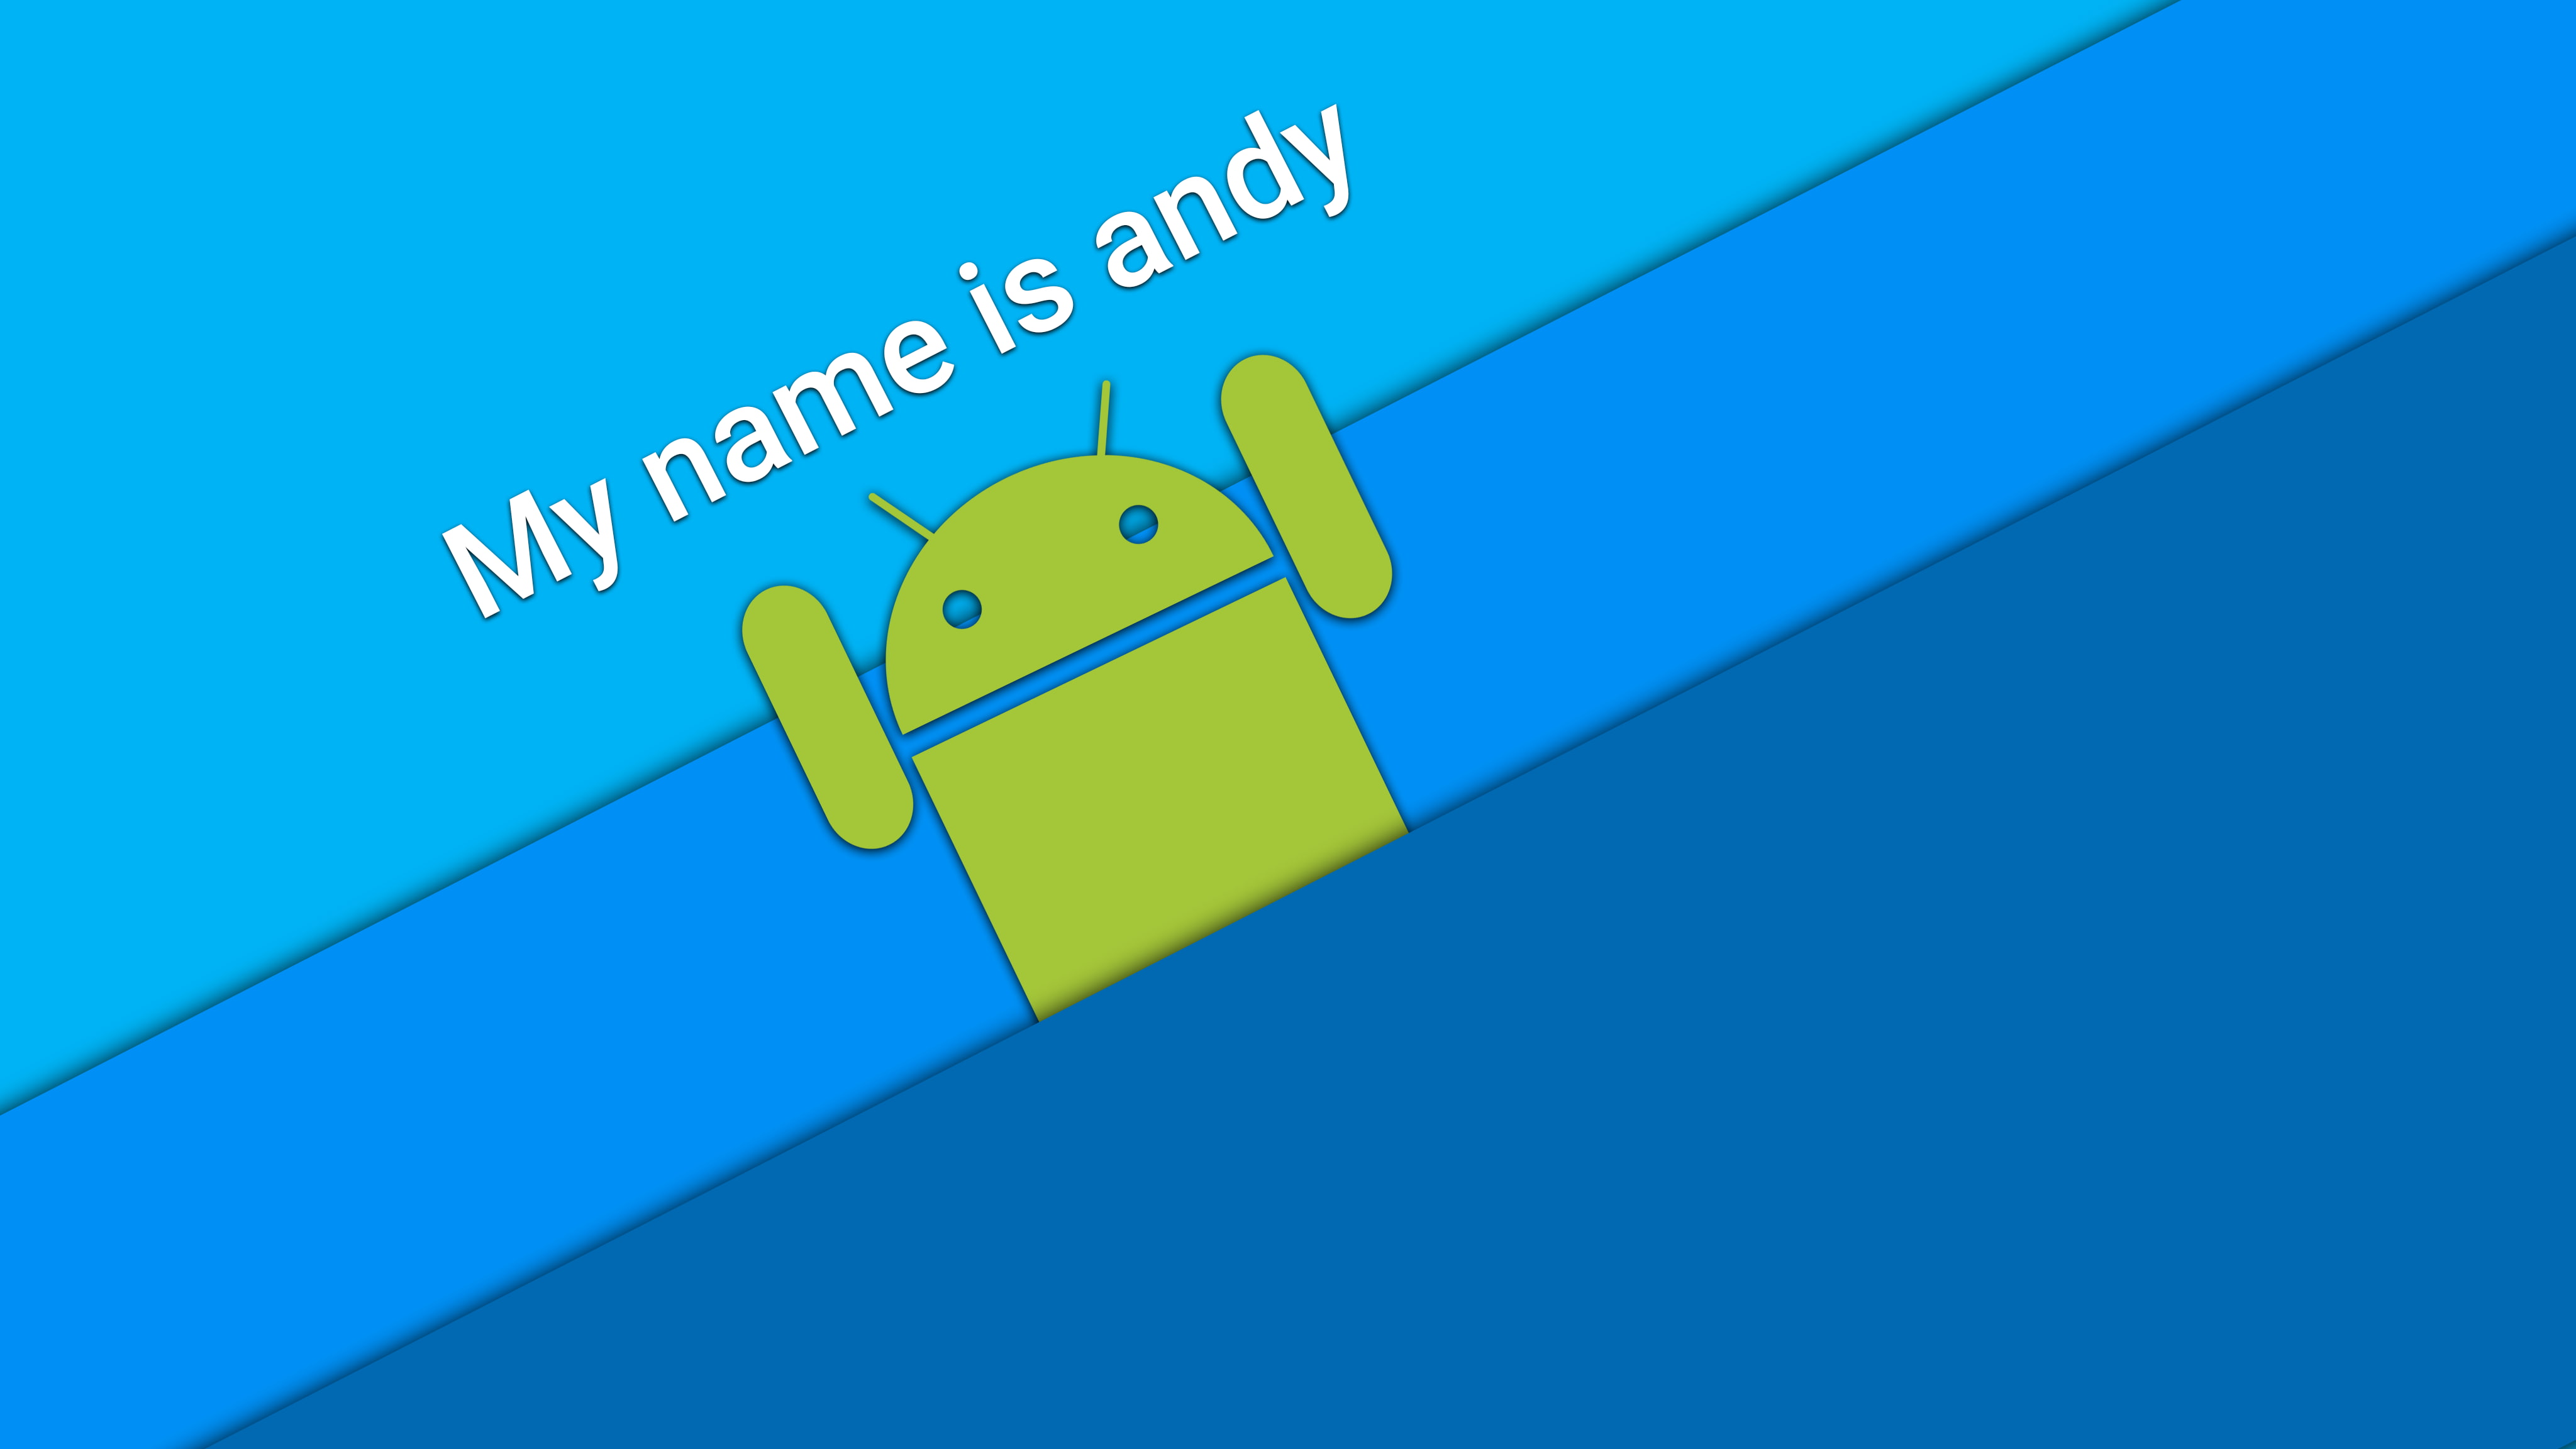 operating system, Android (operating system), blue, communication